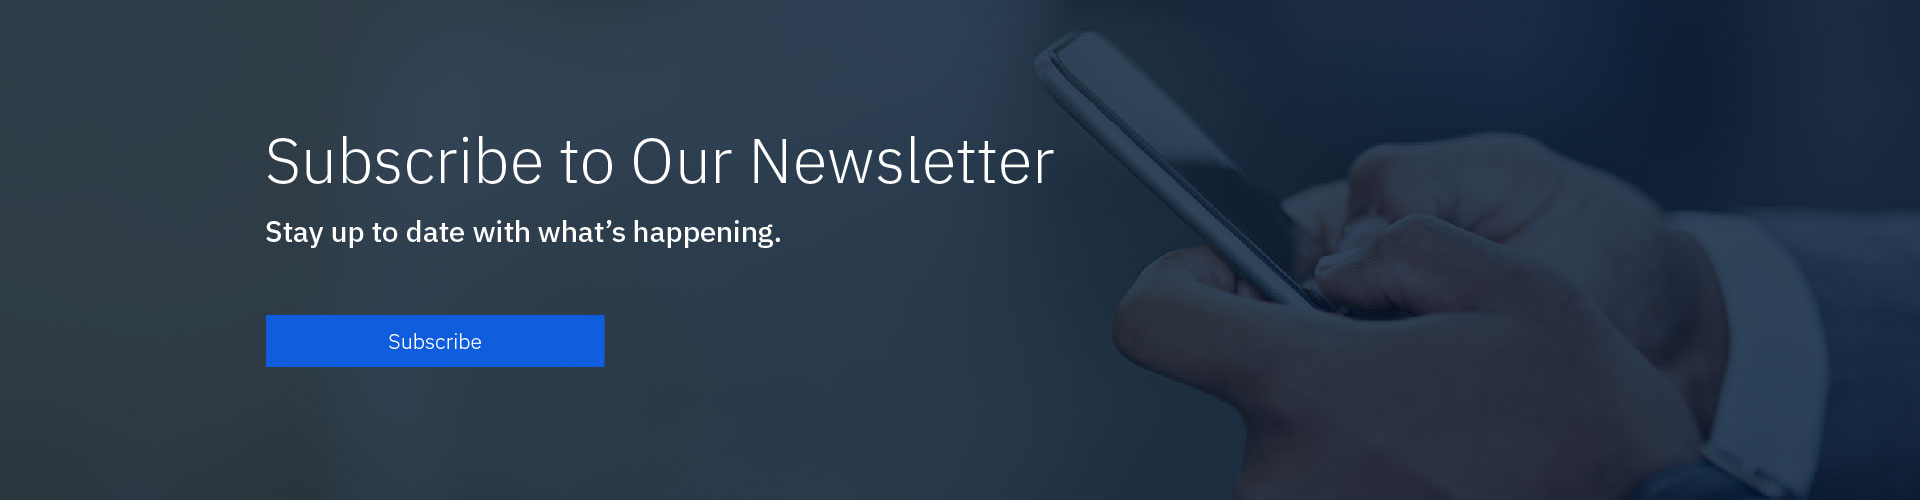 Subscribe to our Newsletter Banner